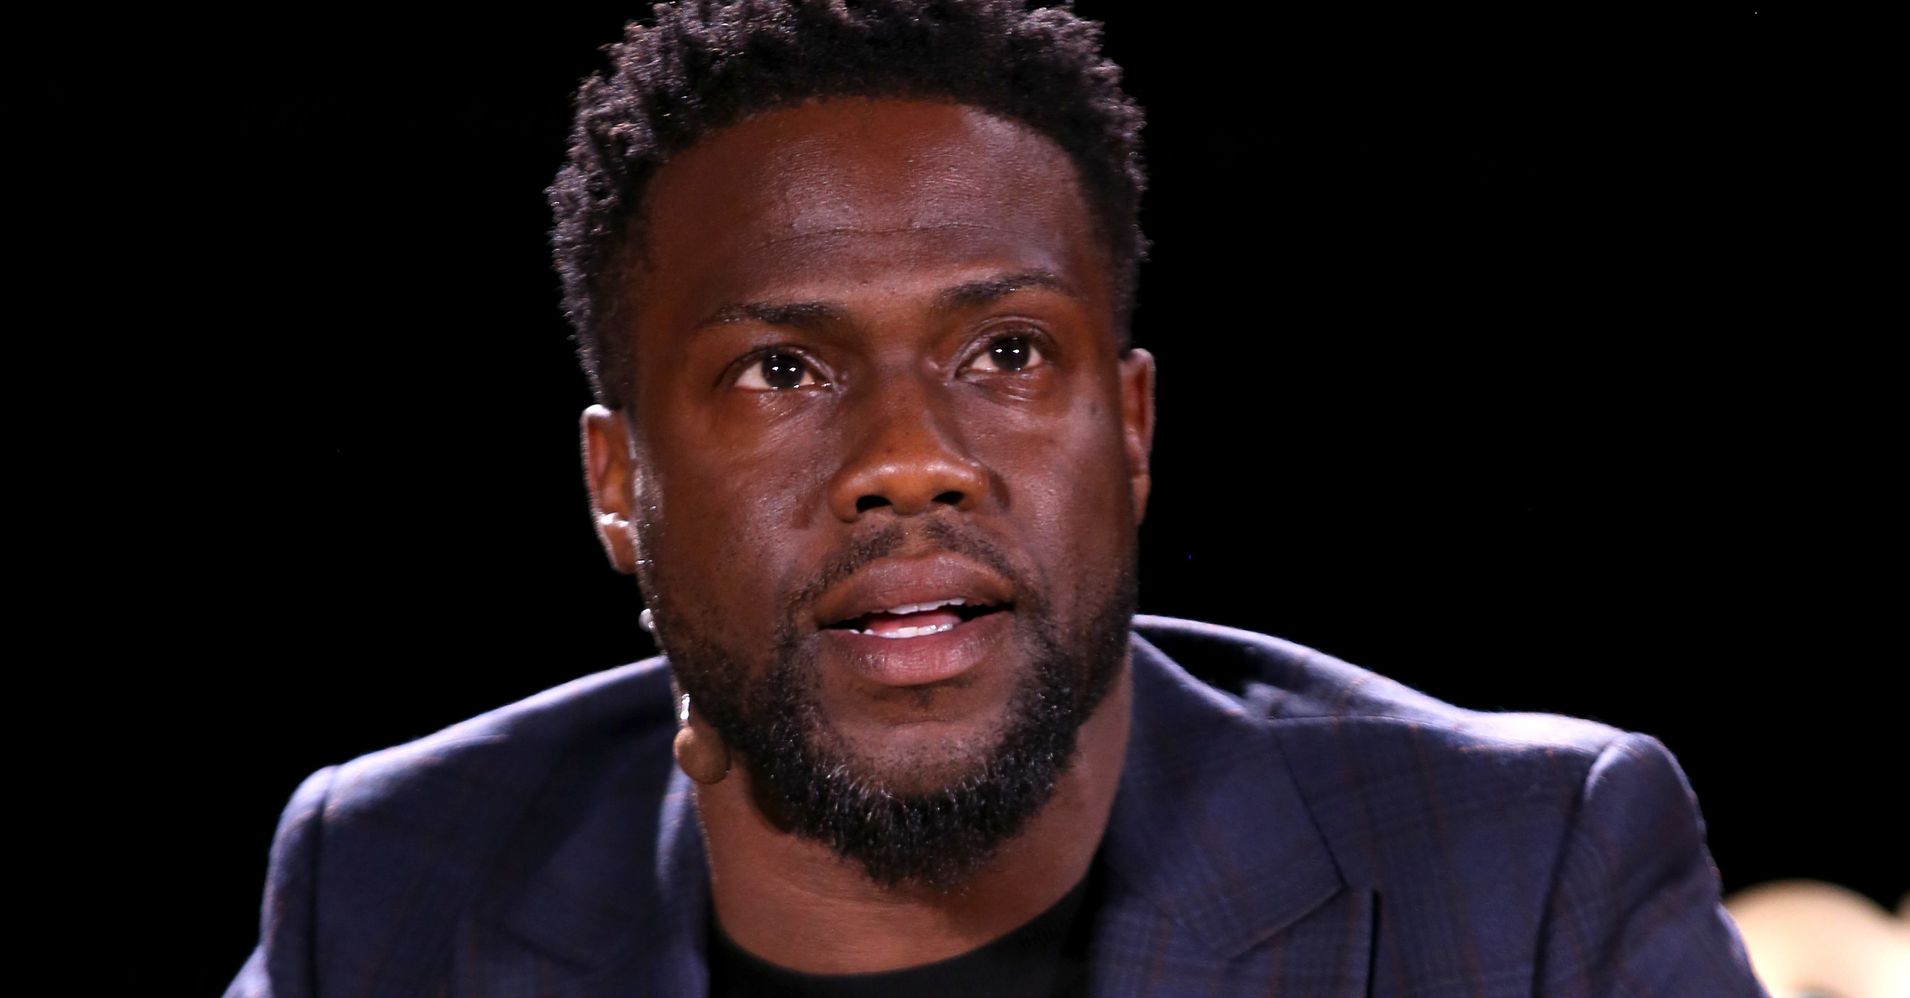 Kevin Hart Announces New Year’s Gig After Oscars Hosting Debacle | HuffPost